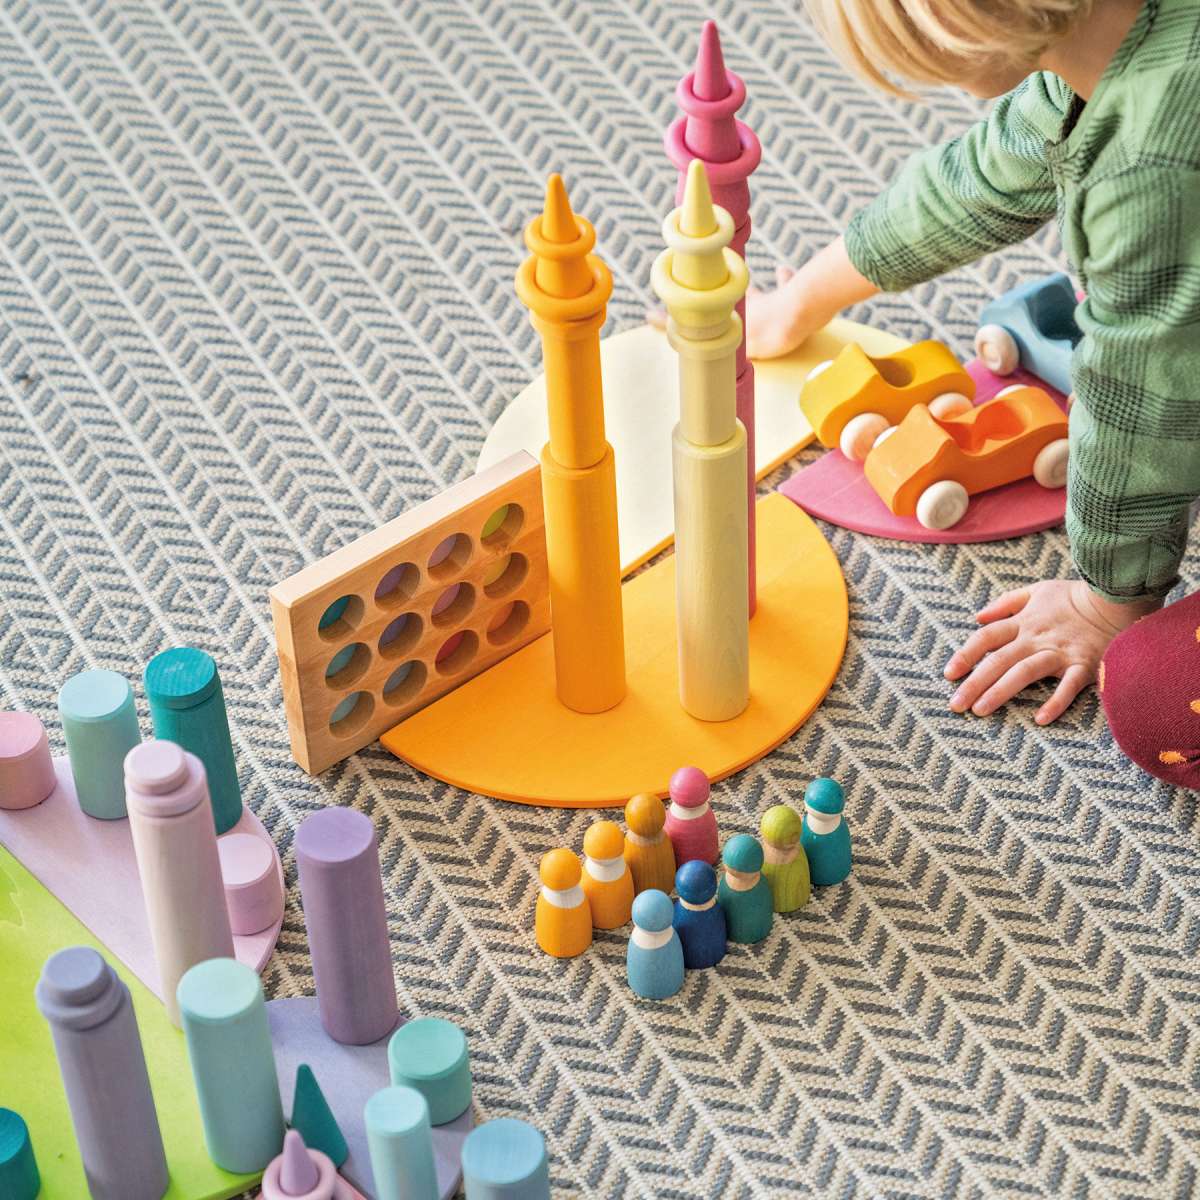 Large Pastel Building Rollers play with cones, rings, coins, and people